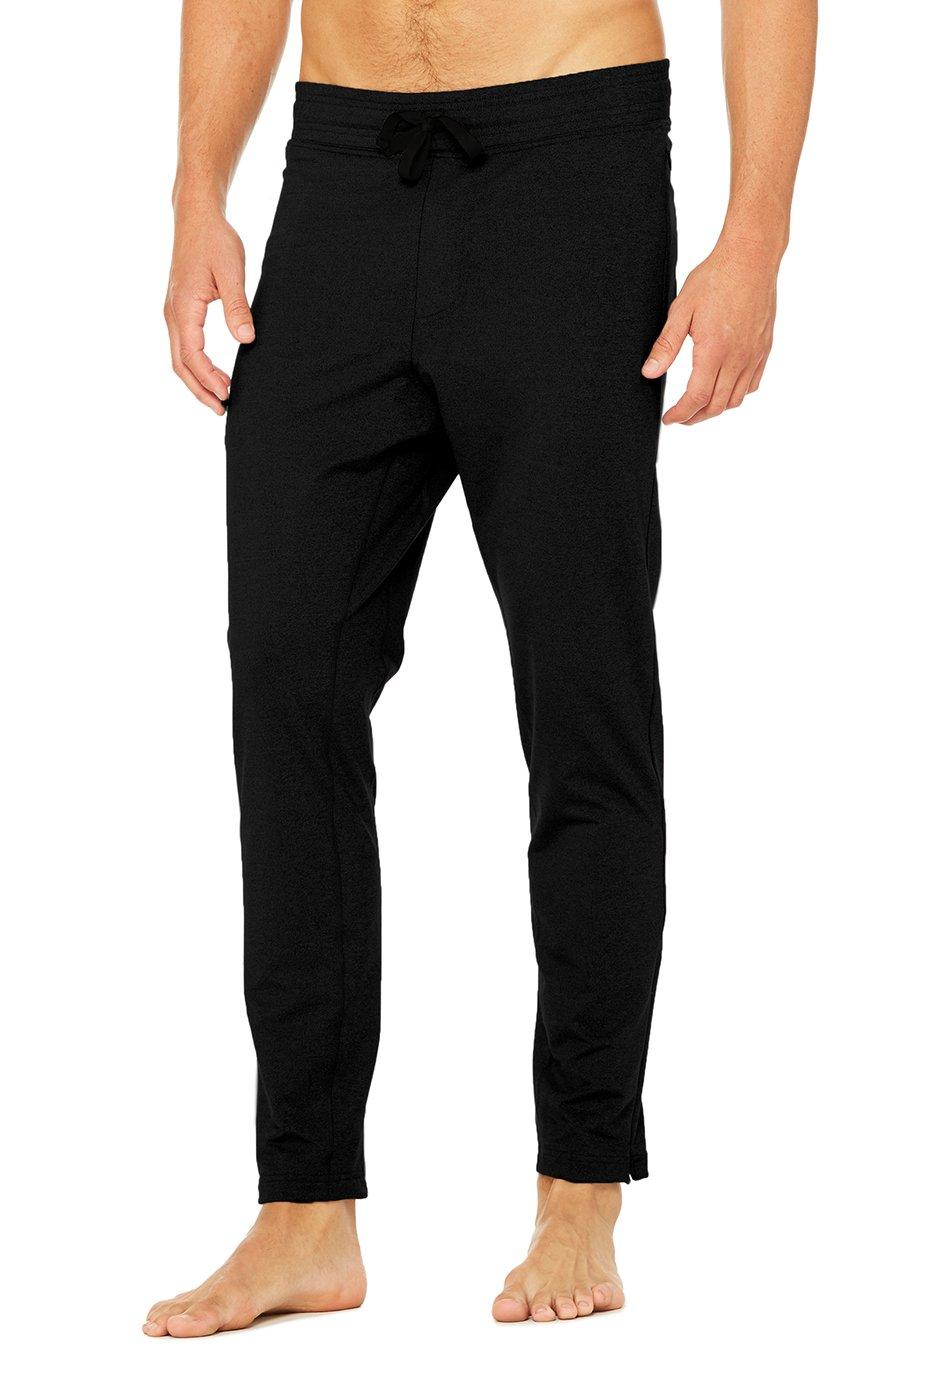 Alo Yoga Synthetic ® Renew Lounge Pant in Black for Men - Lyst